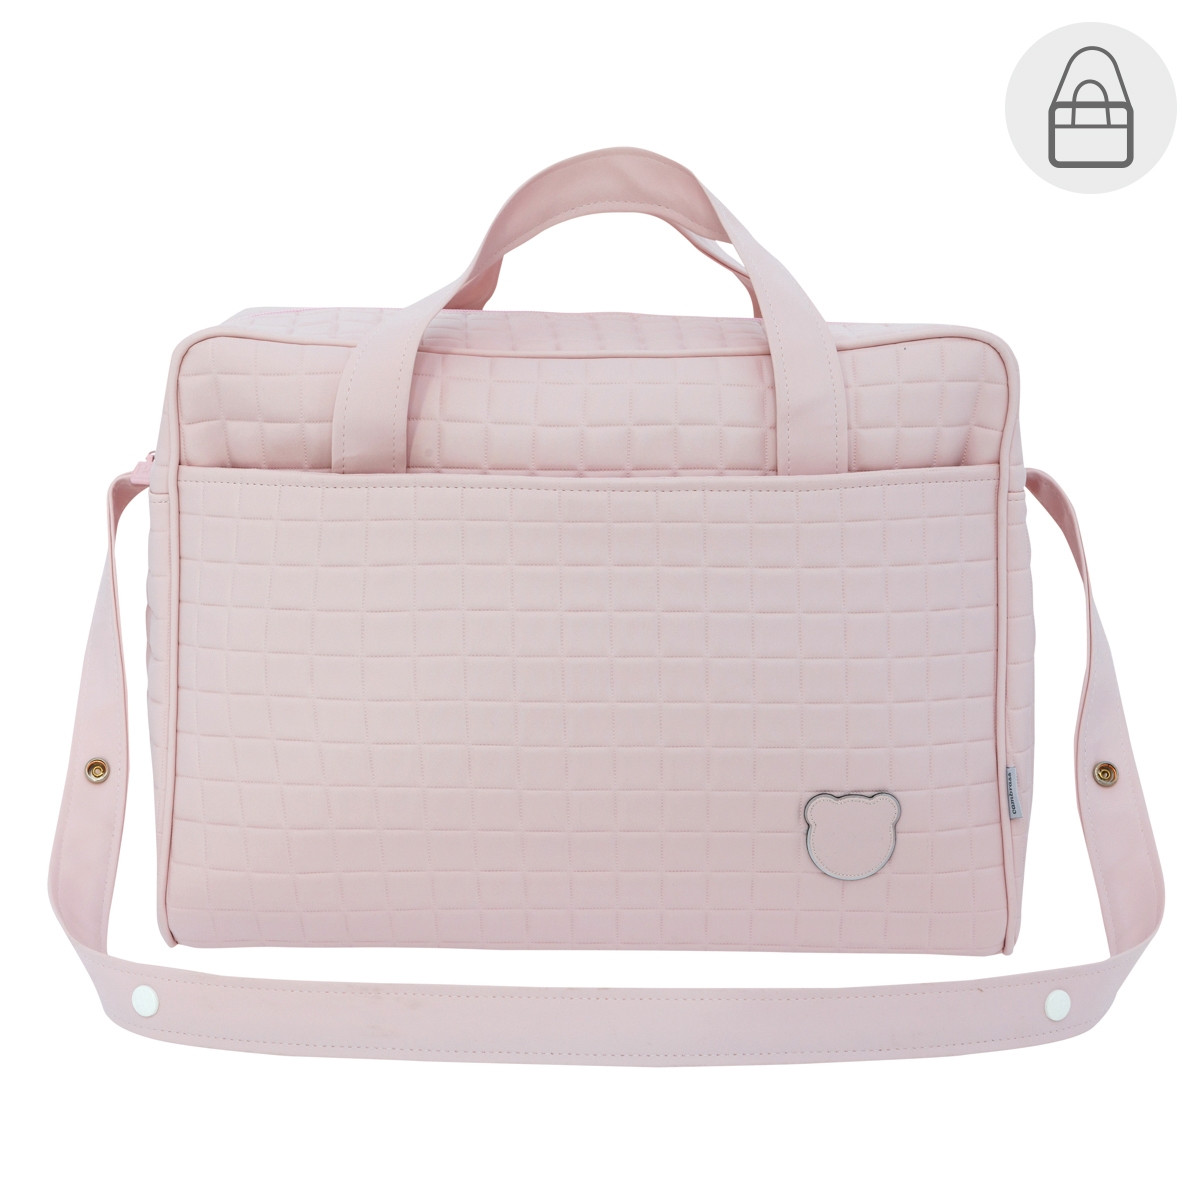 MATERNITY BAG GOFRE PINK 20x44x33 CM CAMBRASS - 1